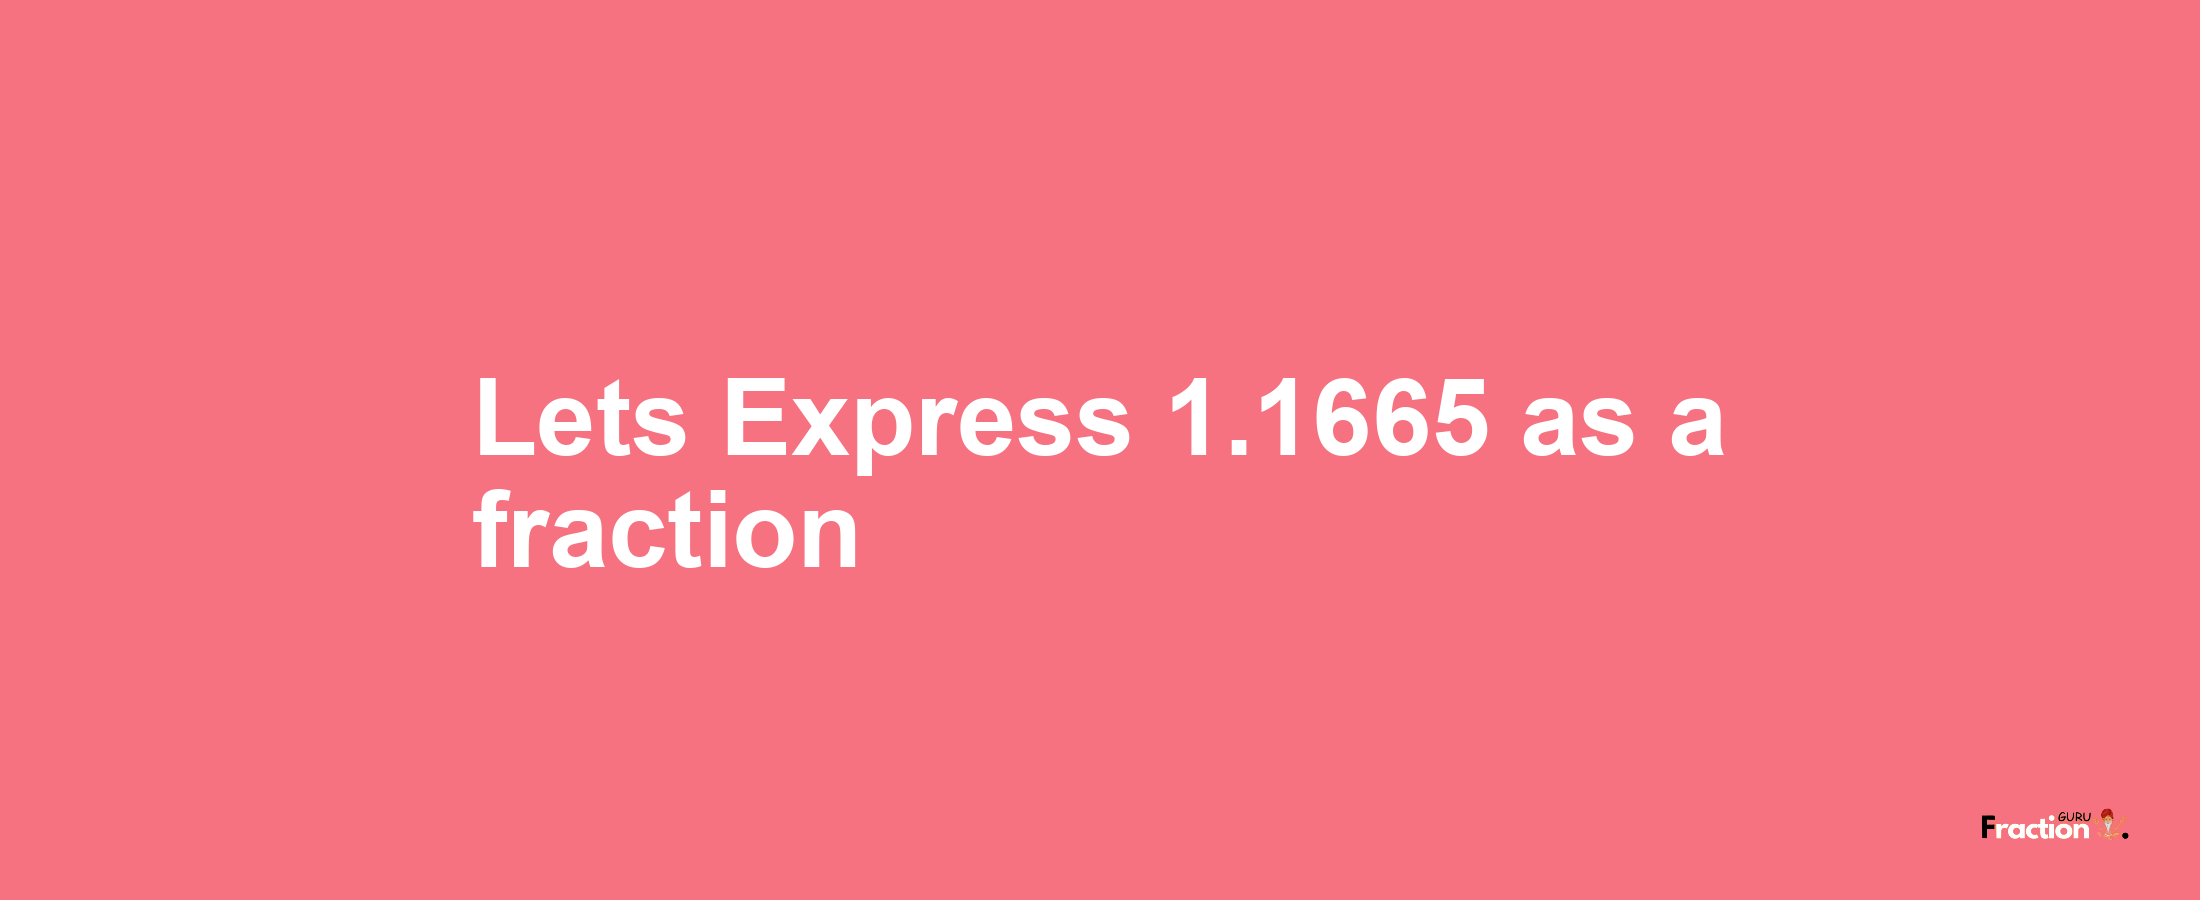 Lets Express 1.1665 as afraction